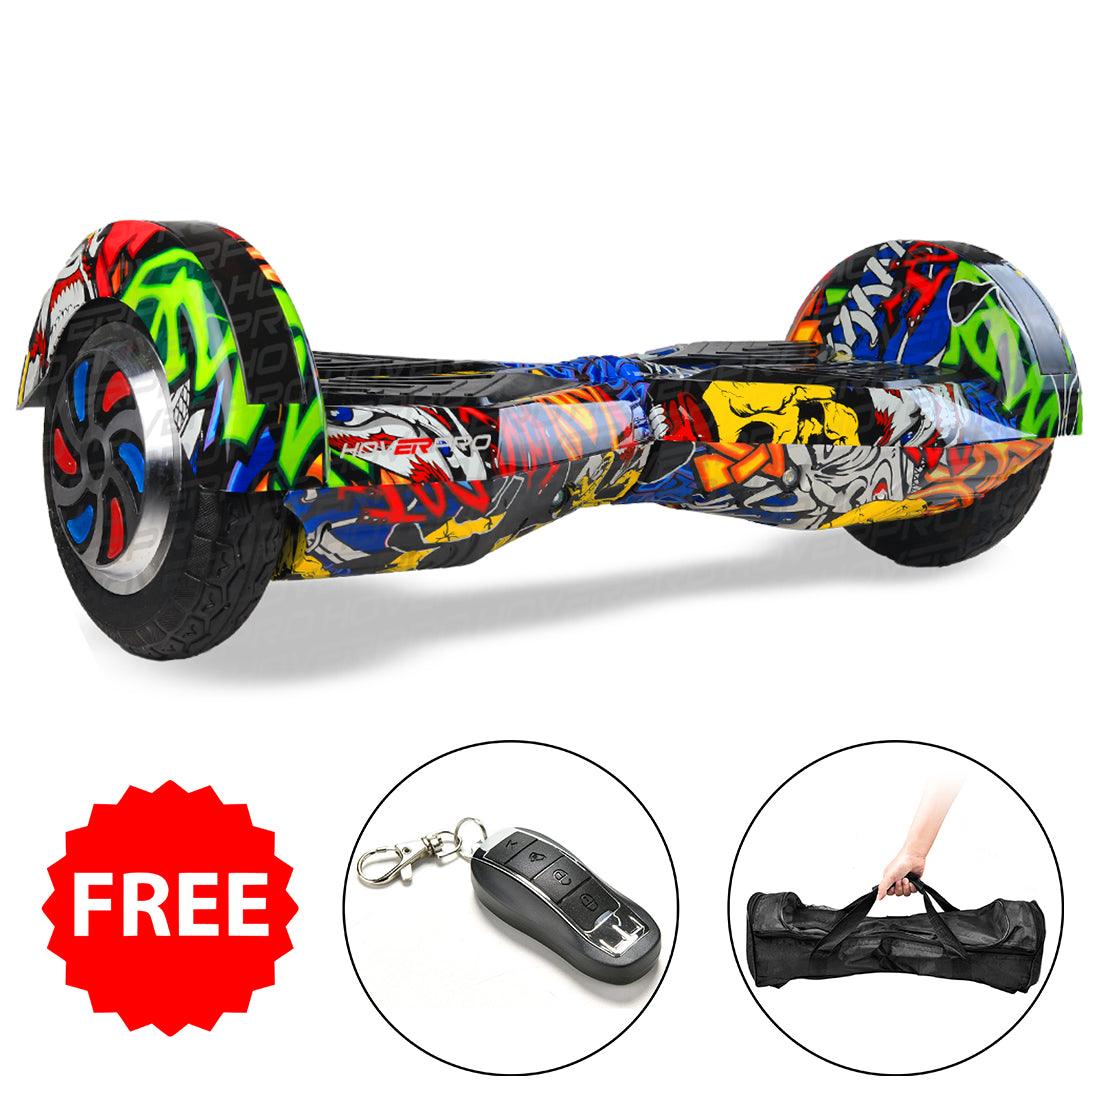 PATOYS | H8 Skullcandy Hoverboard with Remote, Bag and Long Range Battery (Assorted Color) hoverboard PATOYS